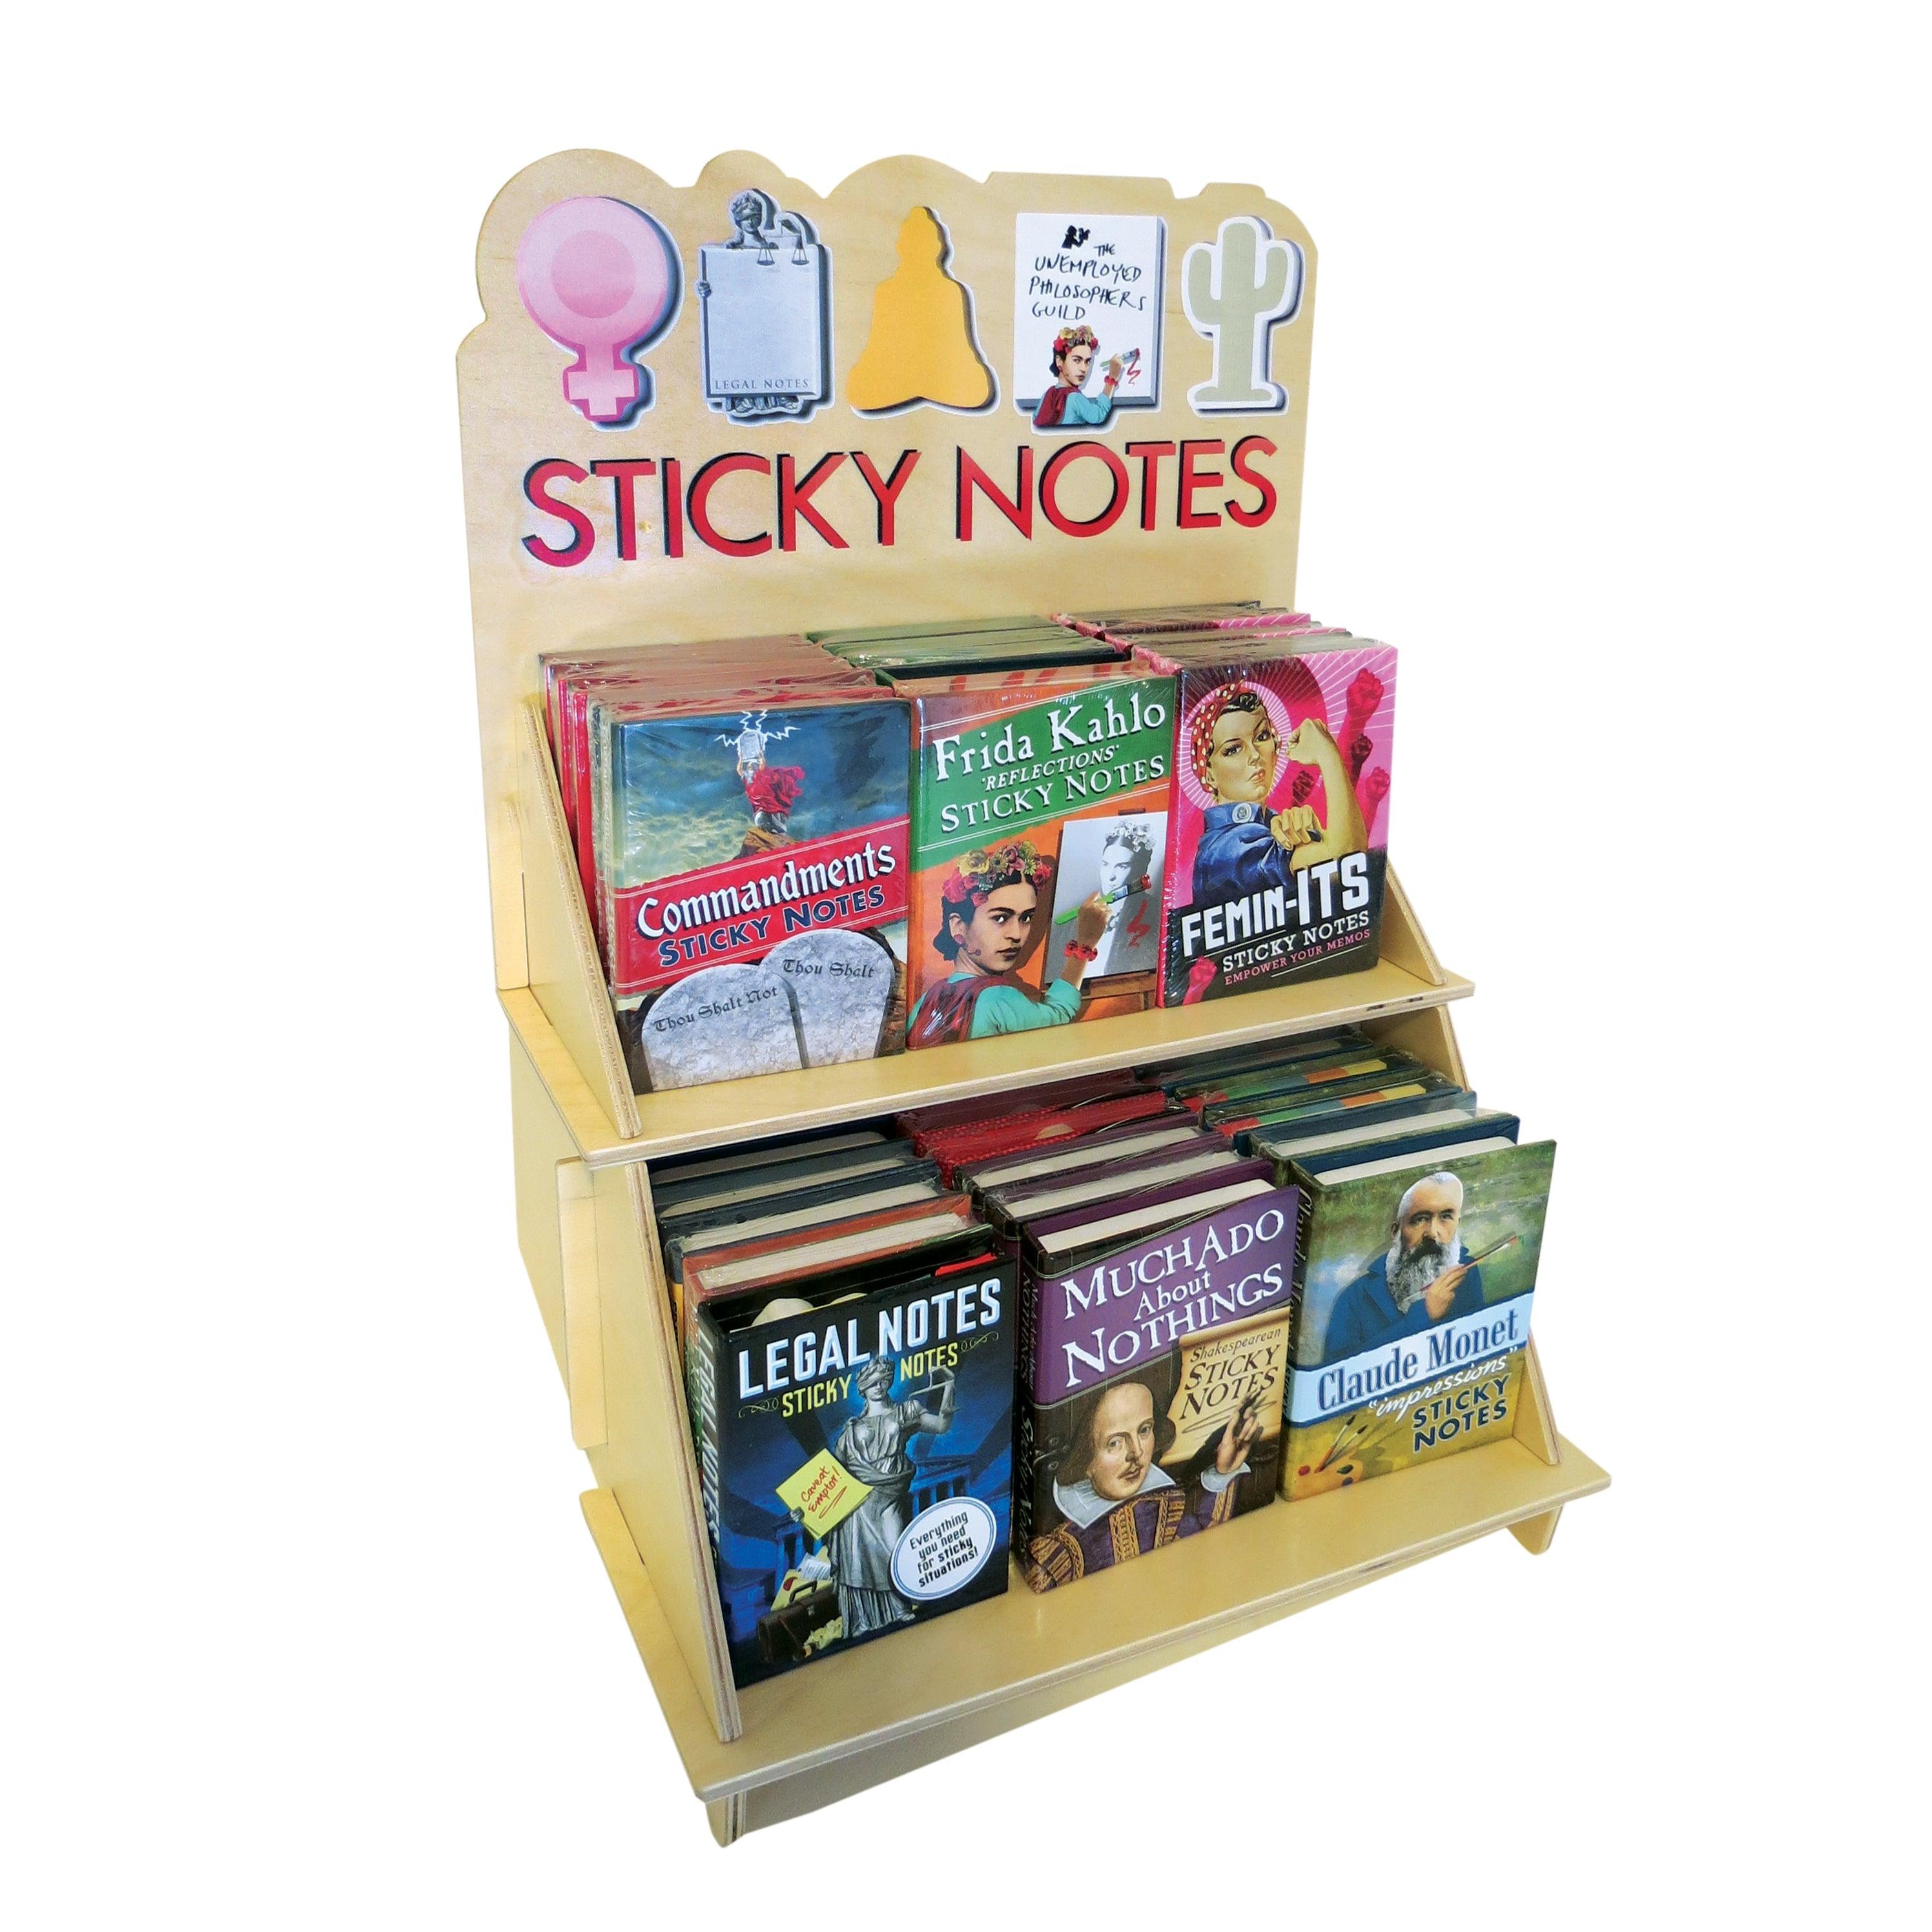 Product photo of Countertop Sticky Note Rack, a novelty gift manufactured by The Unemployed Philosophers Guild.